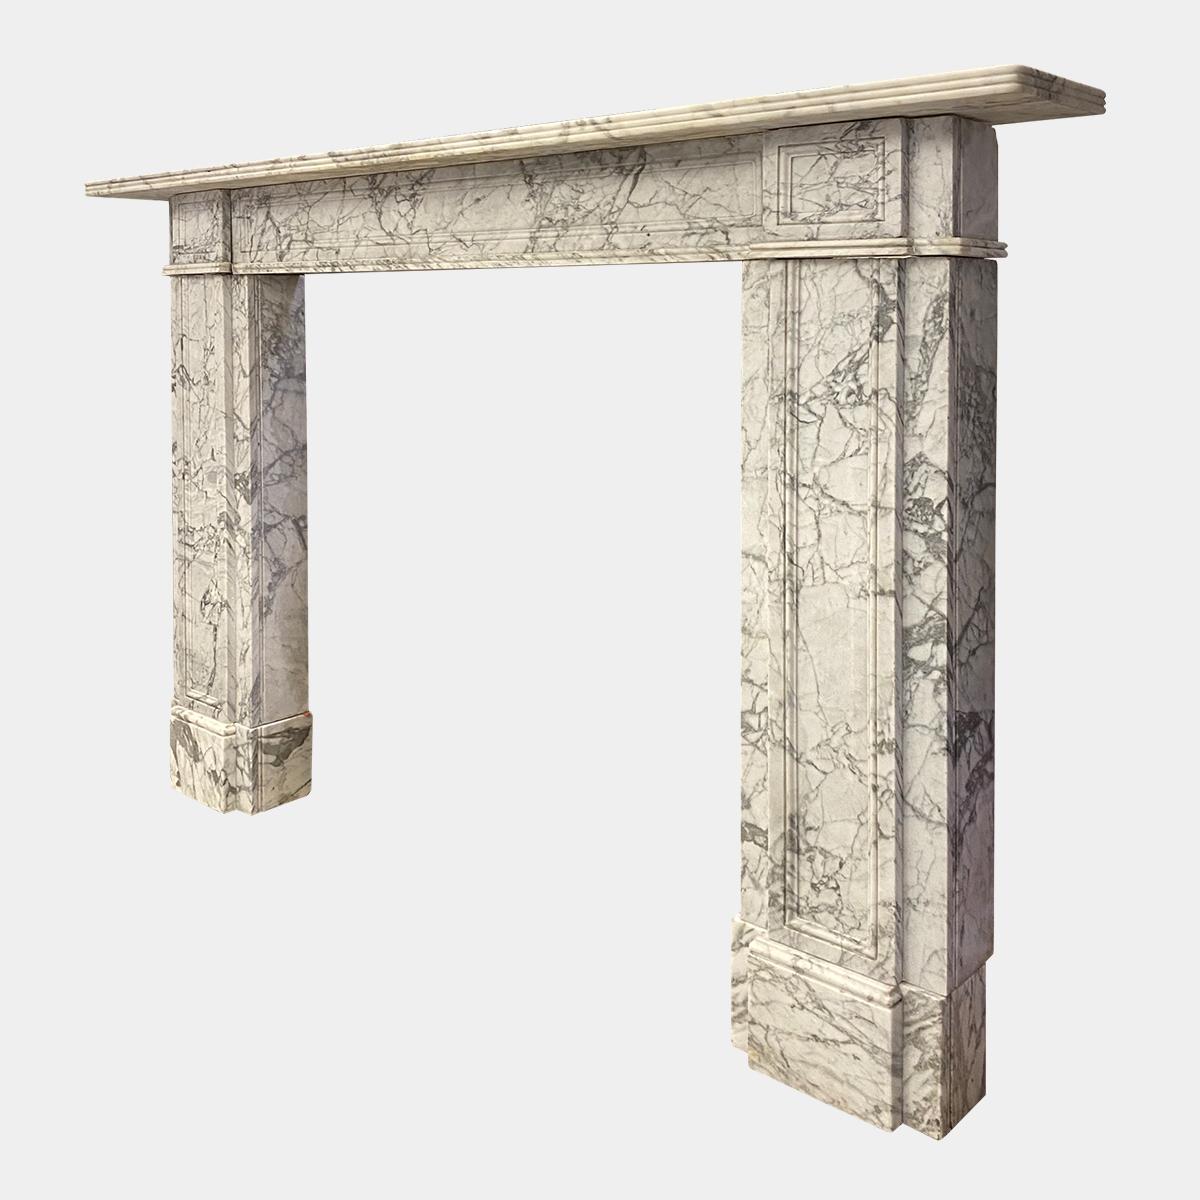 A large variegated marble surround from the early 19th century. Architectural in design, with fielded paneled jambs and frieze. Supported on square foot blocks. The conforming paneled end blocks with paneled frieze between. The mouldings matching